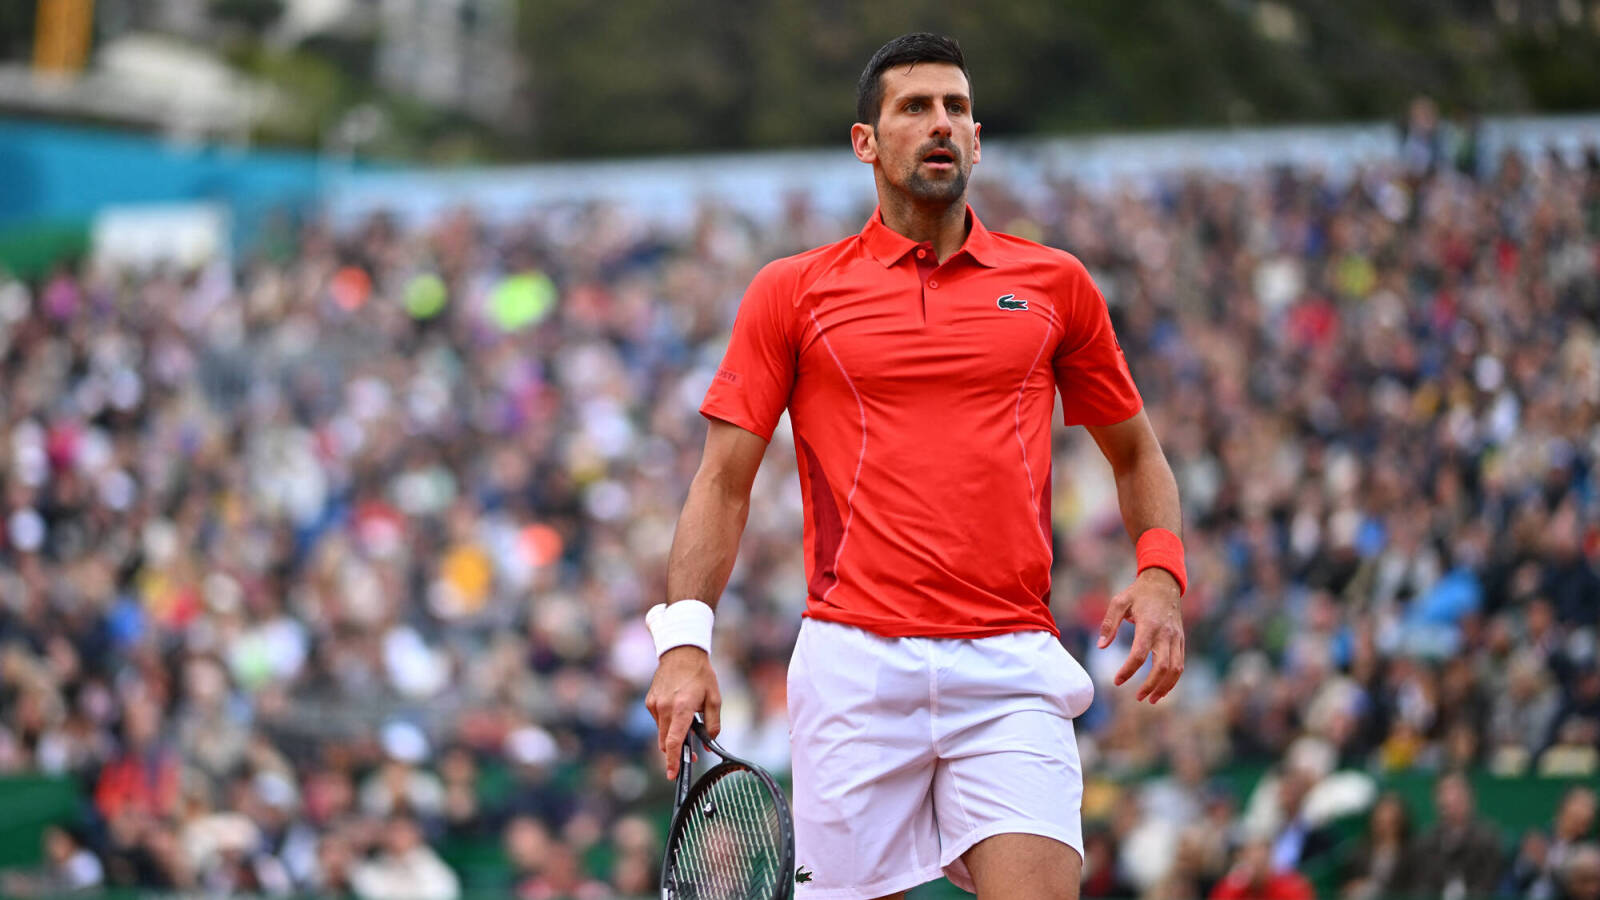 Novak Djokovic offers cold reply after being asked if he’s afraid of facing Italian players ahead of his Monte Carlo clash with Lorenzo Musetti